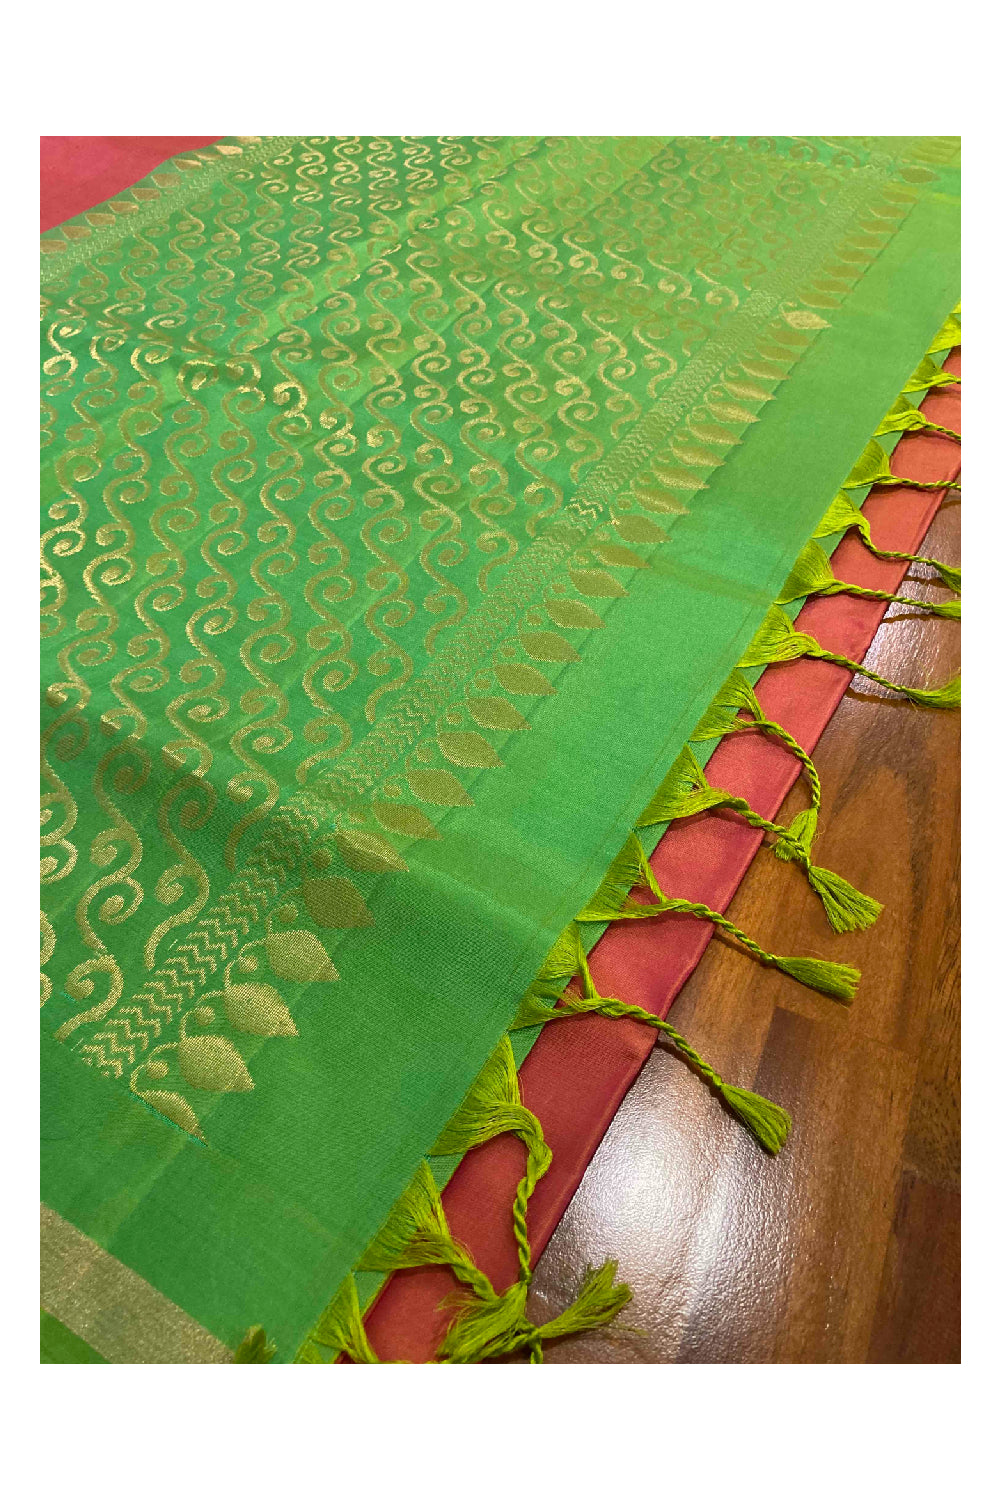 Southloom Handloom Pure Silk Kanchipuram Saree in Red and Green Floral Motifs